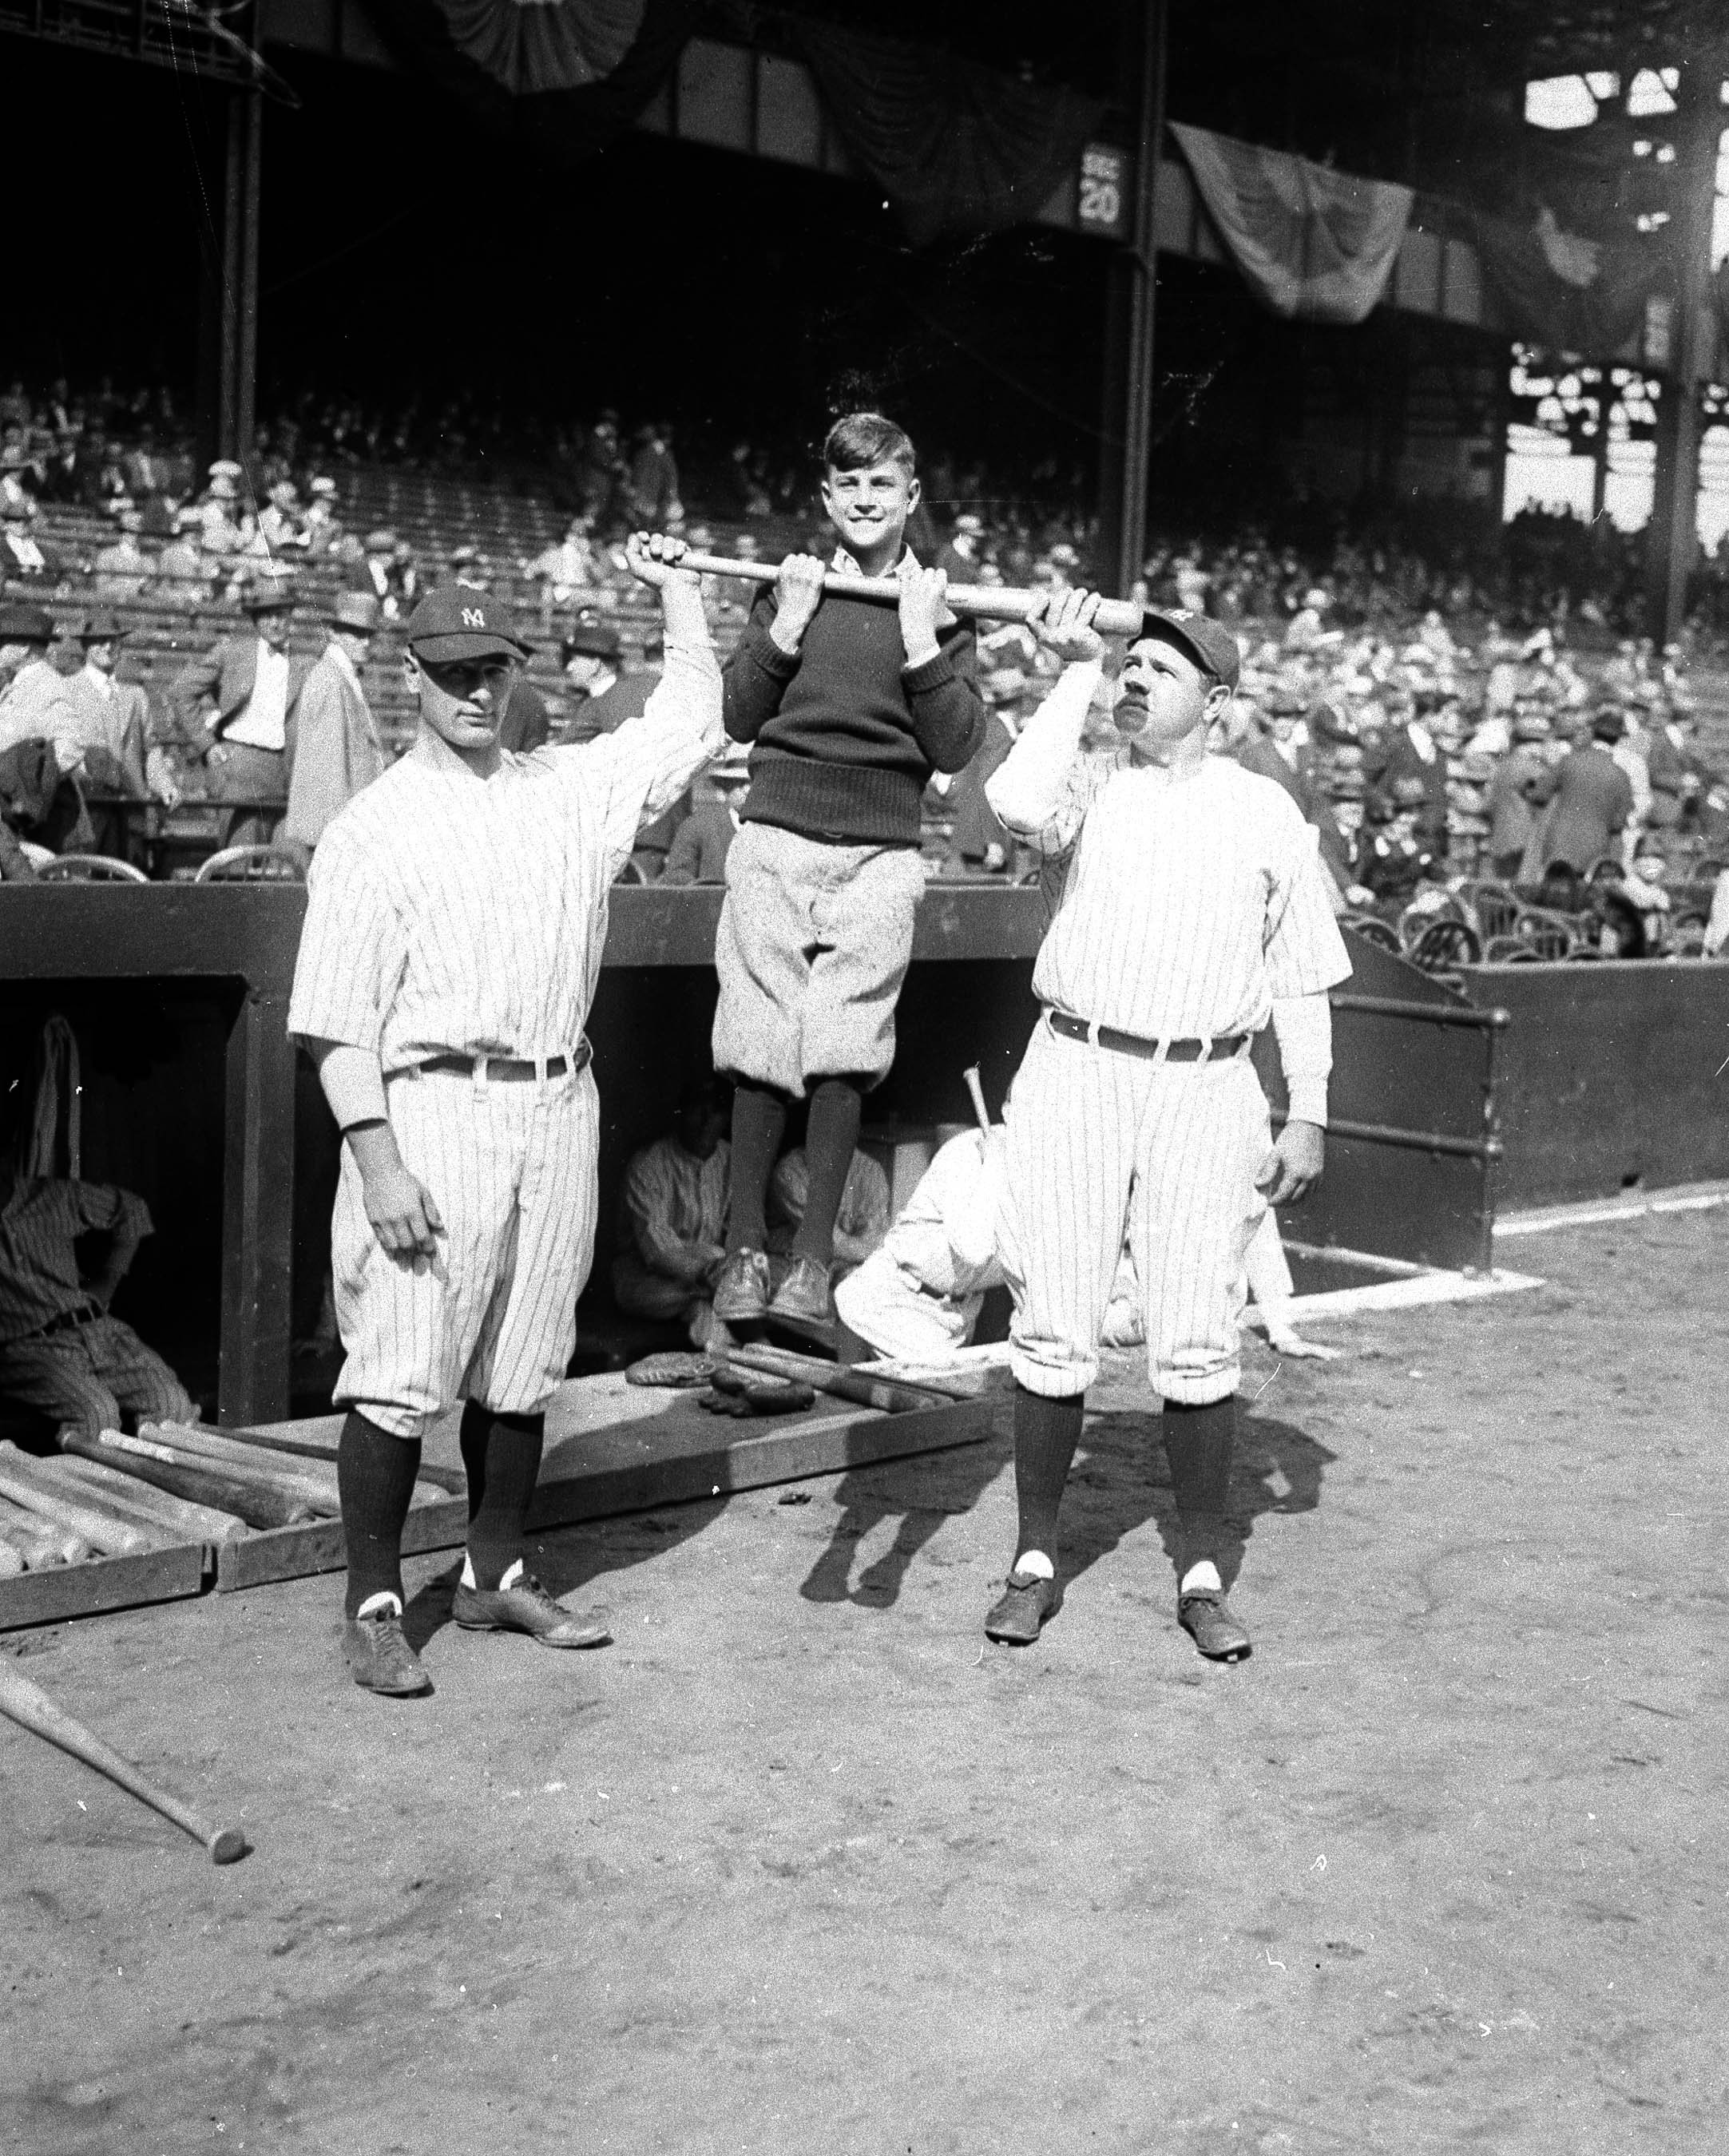  New York Yankees Lou Gehrig, left,  and Babe Ruth holding up Harold Baker as they create a chinning bar for the youth at Yankee Stadium in New York on October 7, 1927.  (AP Photo) 